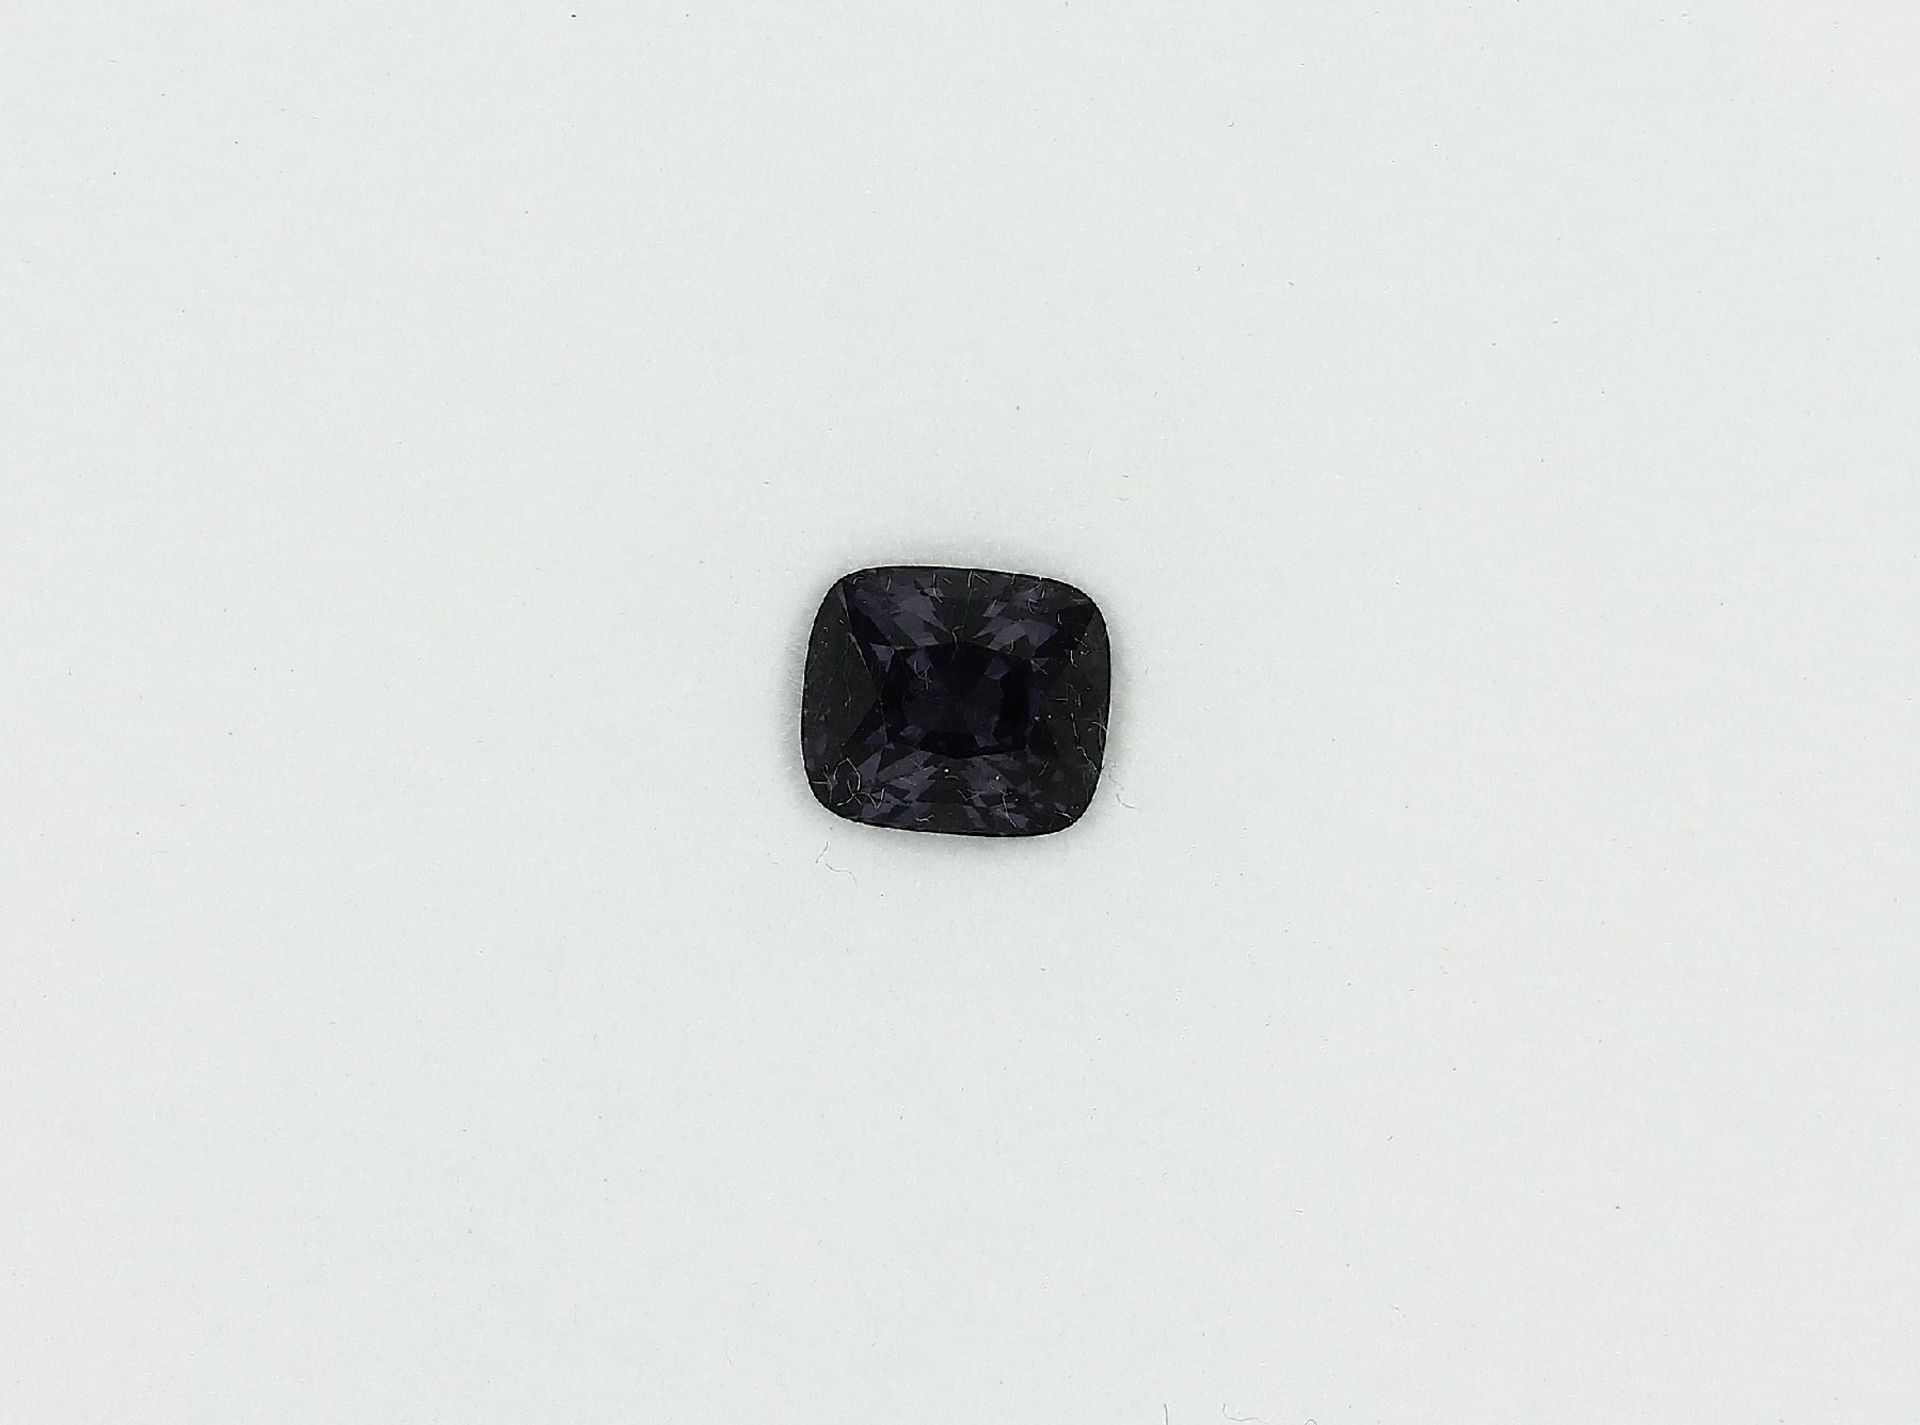 Loser Spinell 1.78 ct, ca. 6.1 x 4.9 x 7.1 mm Schätzpreis: 180, - EURLoose spinel , 1.78 ct, approx.